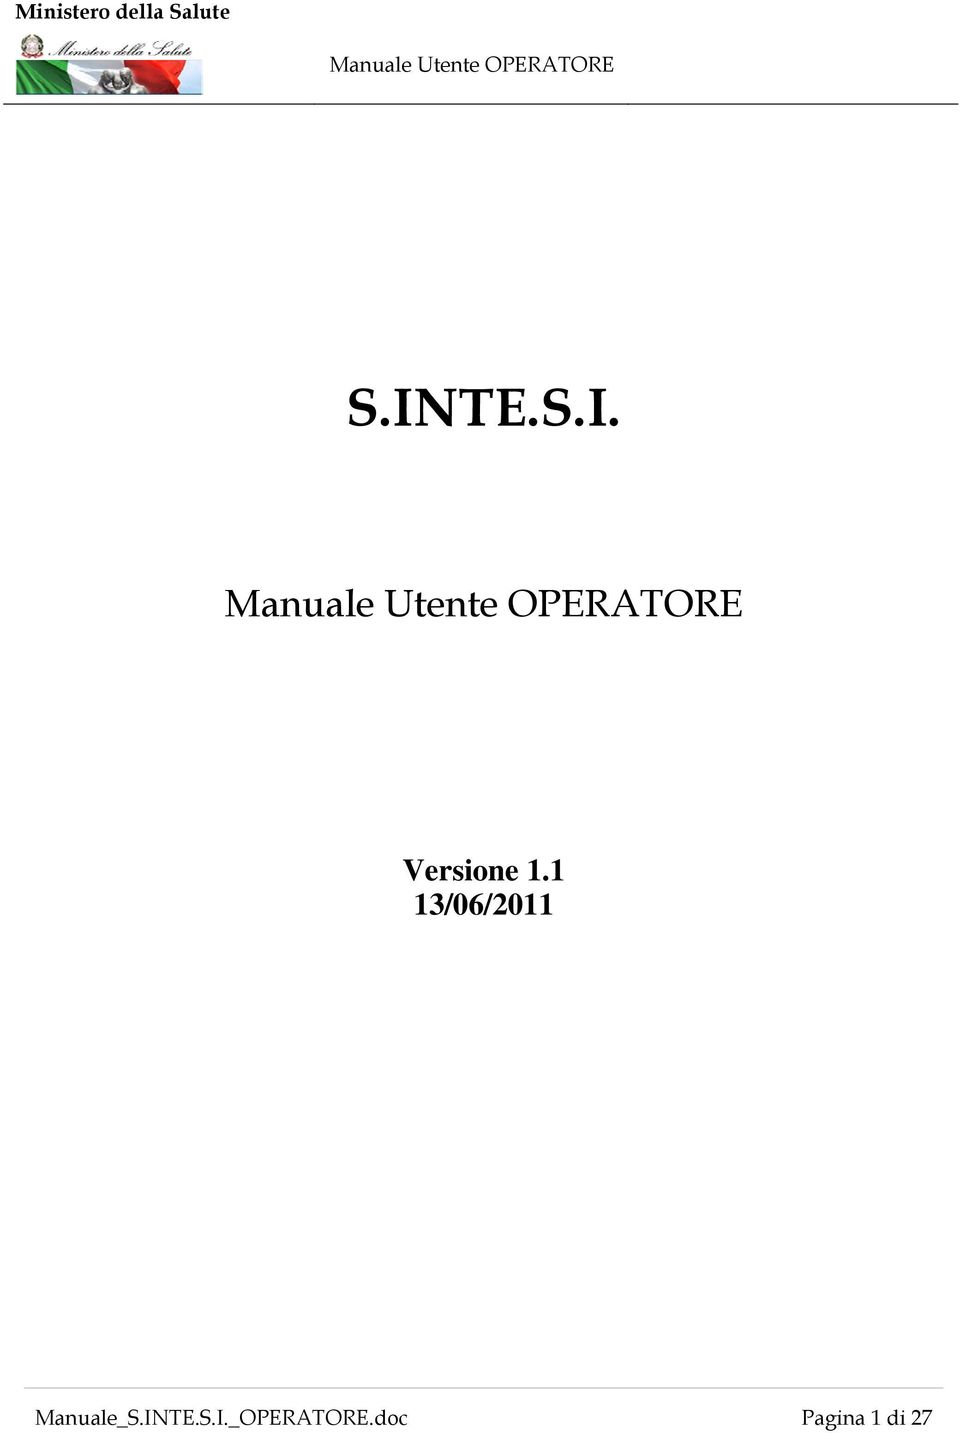 Manuale_S.IN